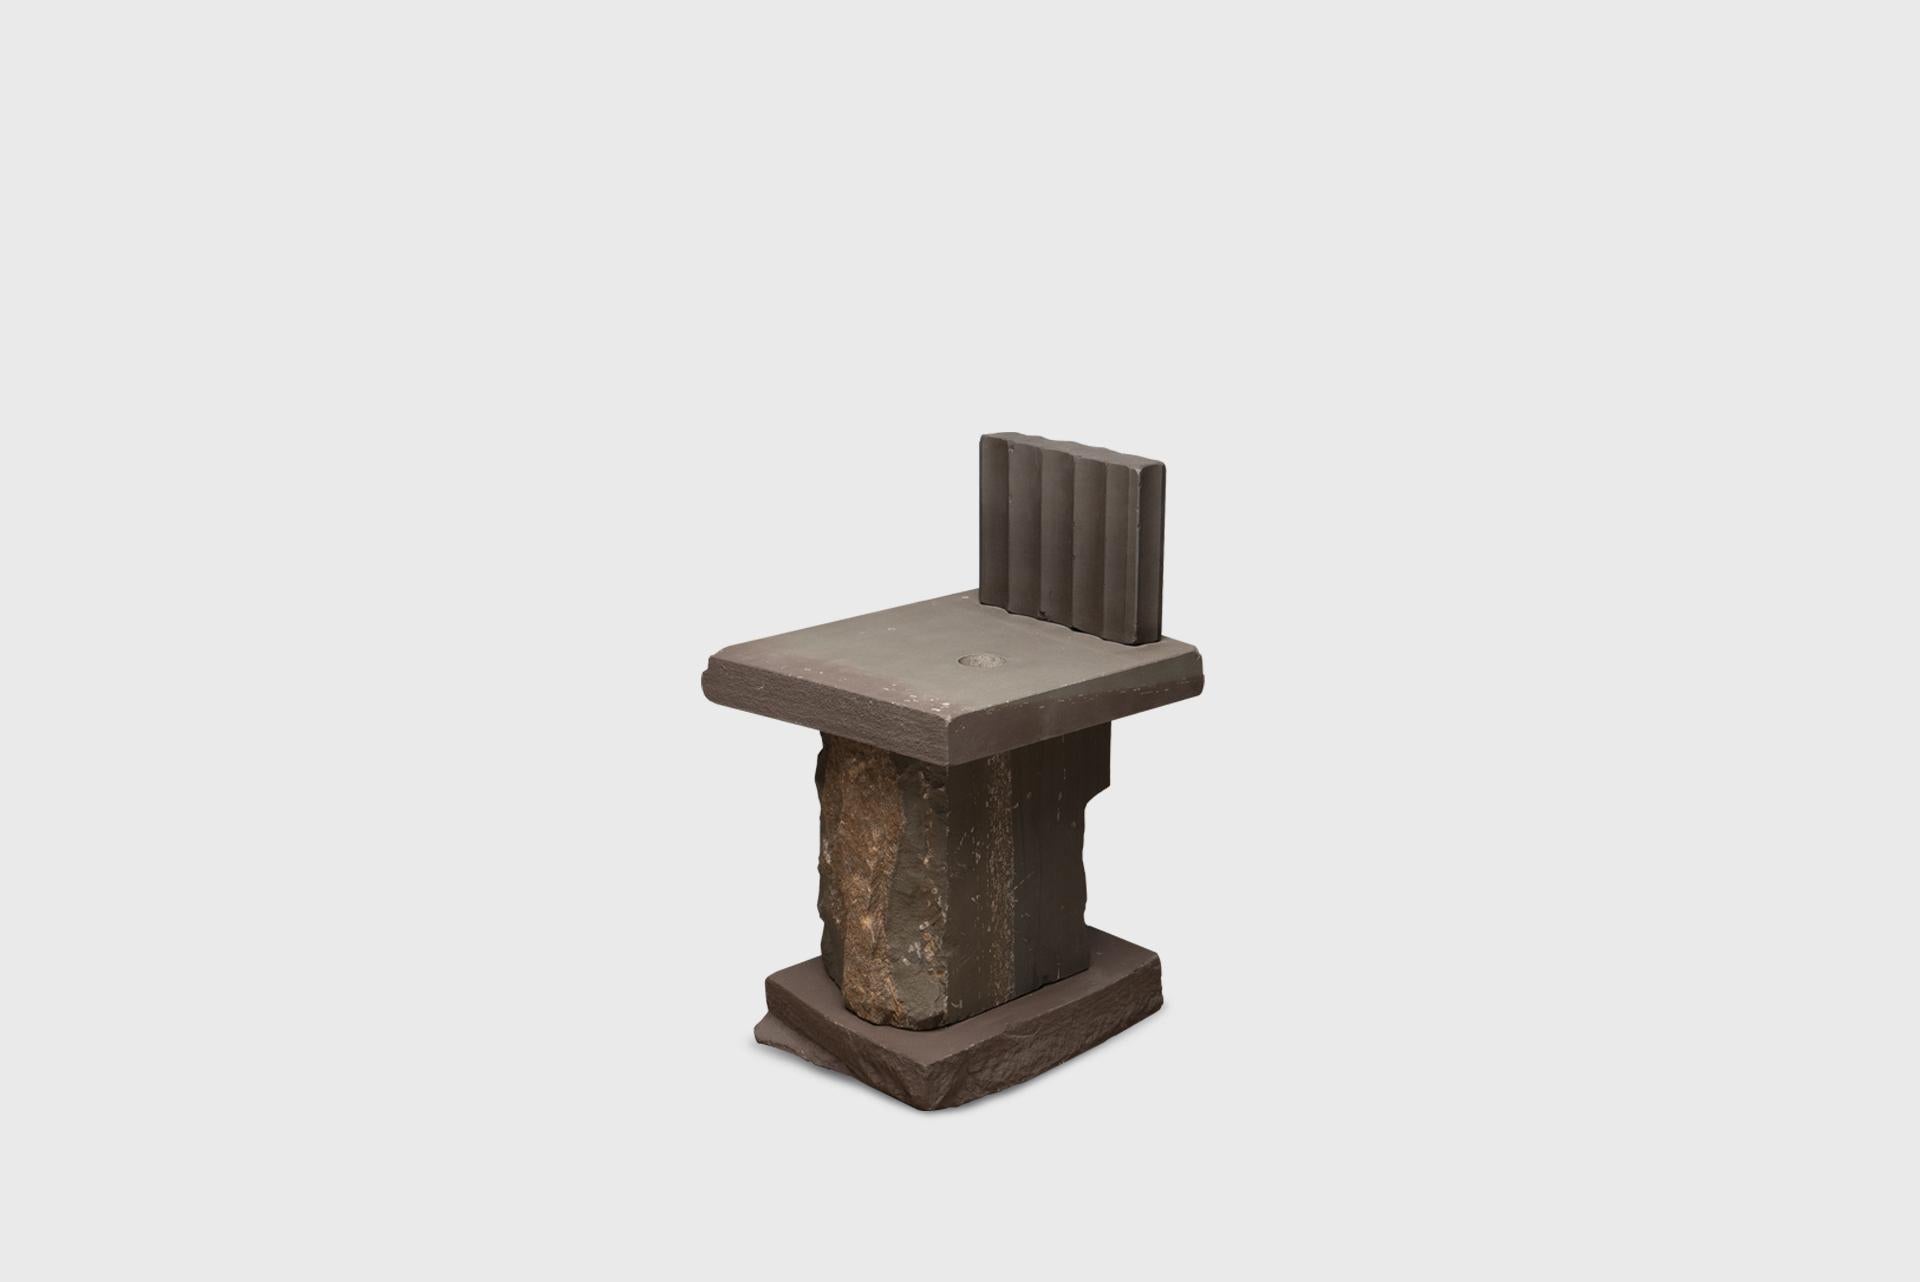 Contemporary Natural Chair 19, Graywacke Offcut Gray Stone, Carsten in Der Elst For Sale 3